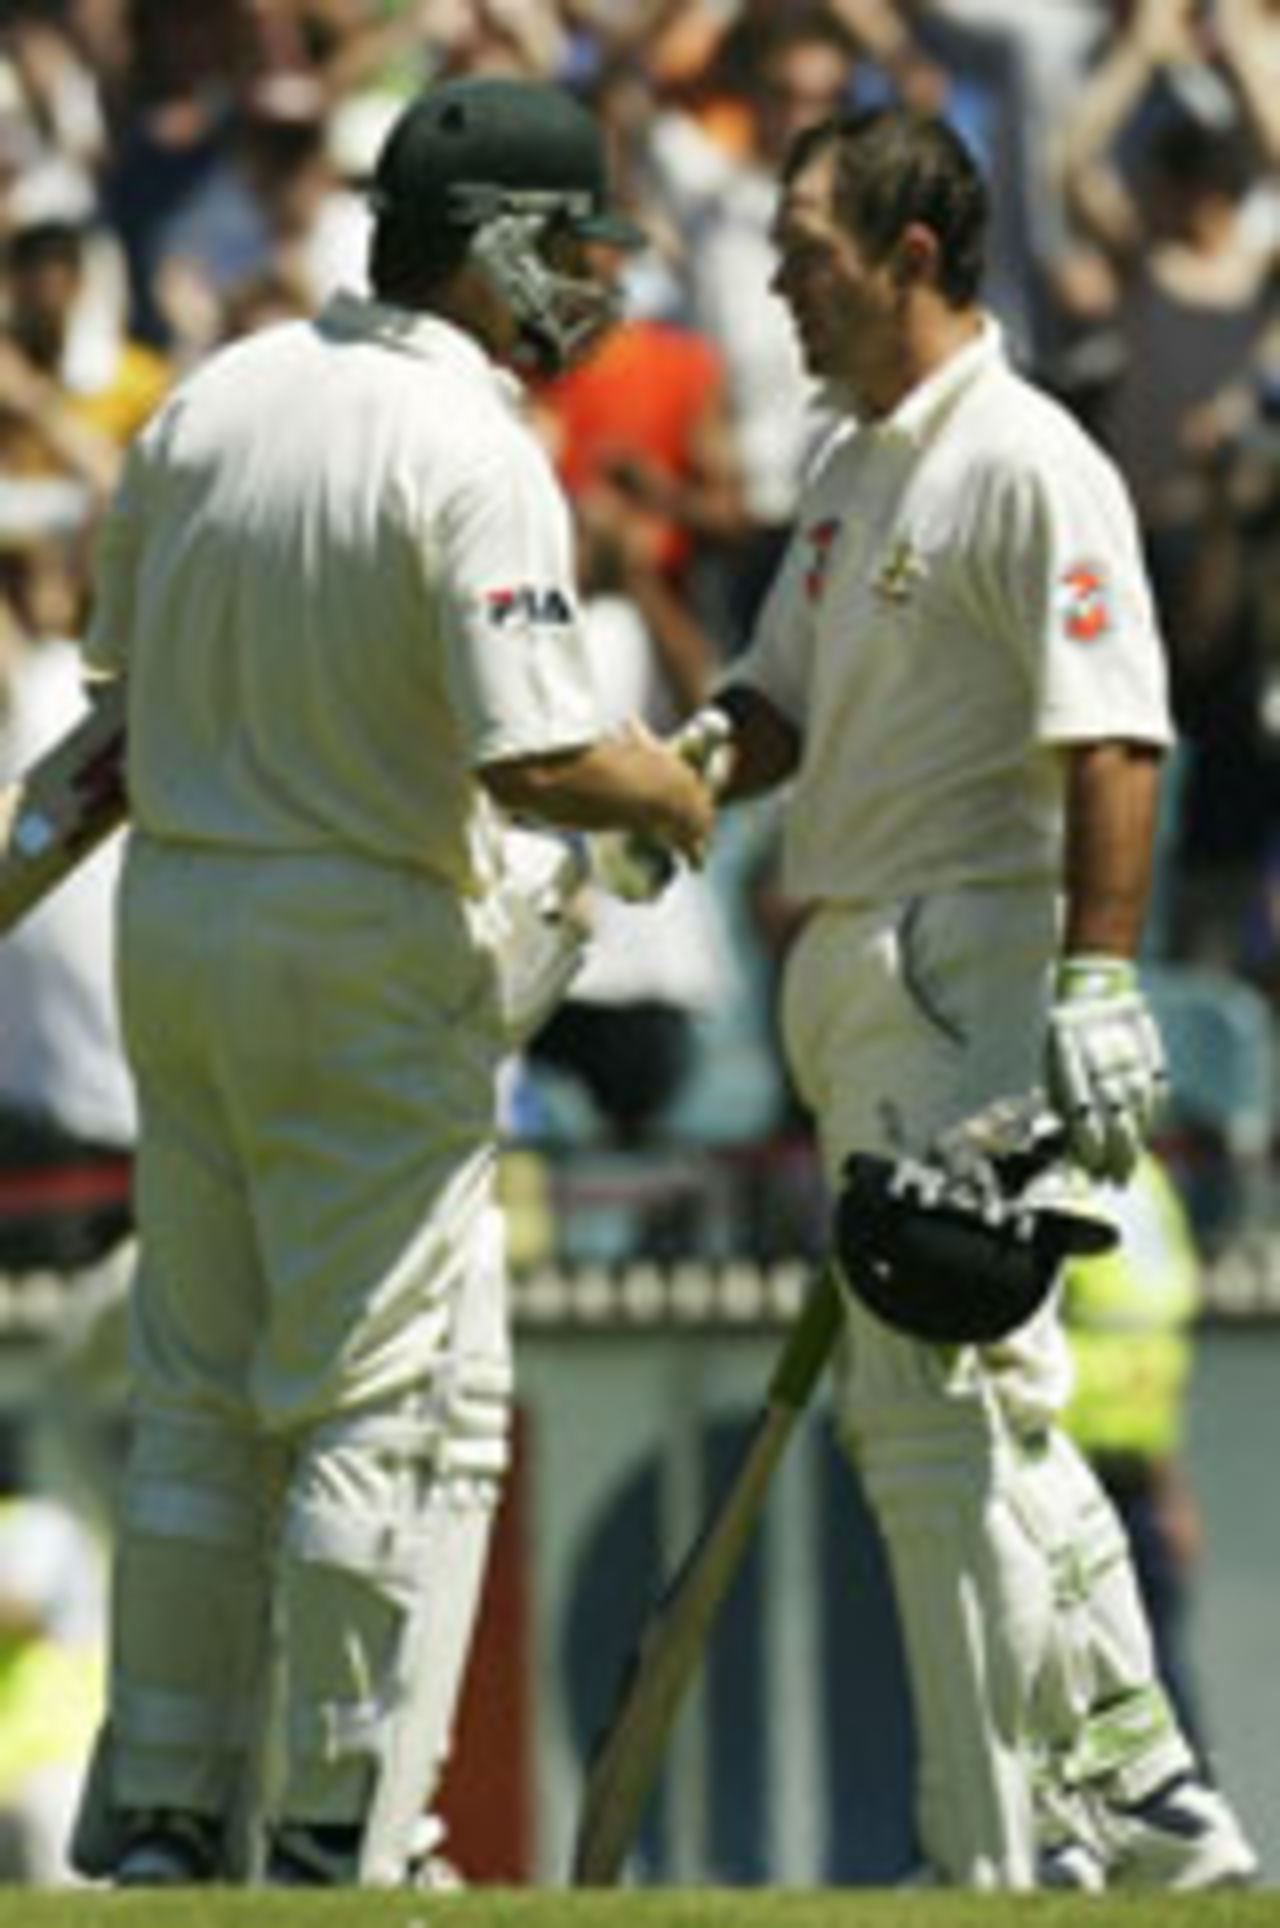 Steve Waugh congratulates Ricky Ponting after his double-century, 3rd Test, Melbourne, 3rd day, December 28, 2003